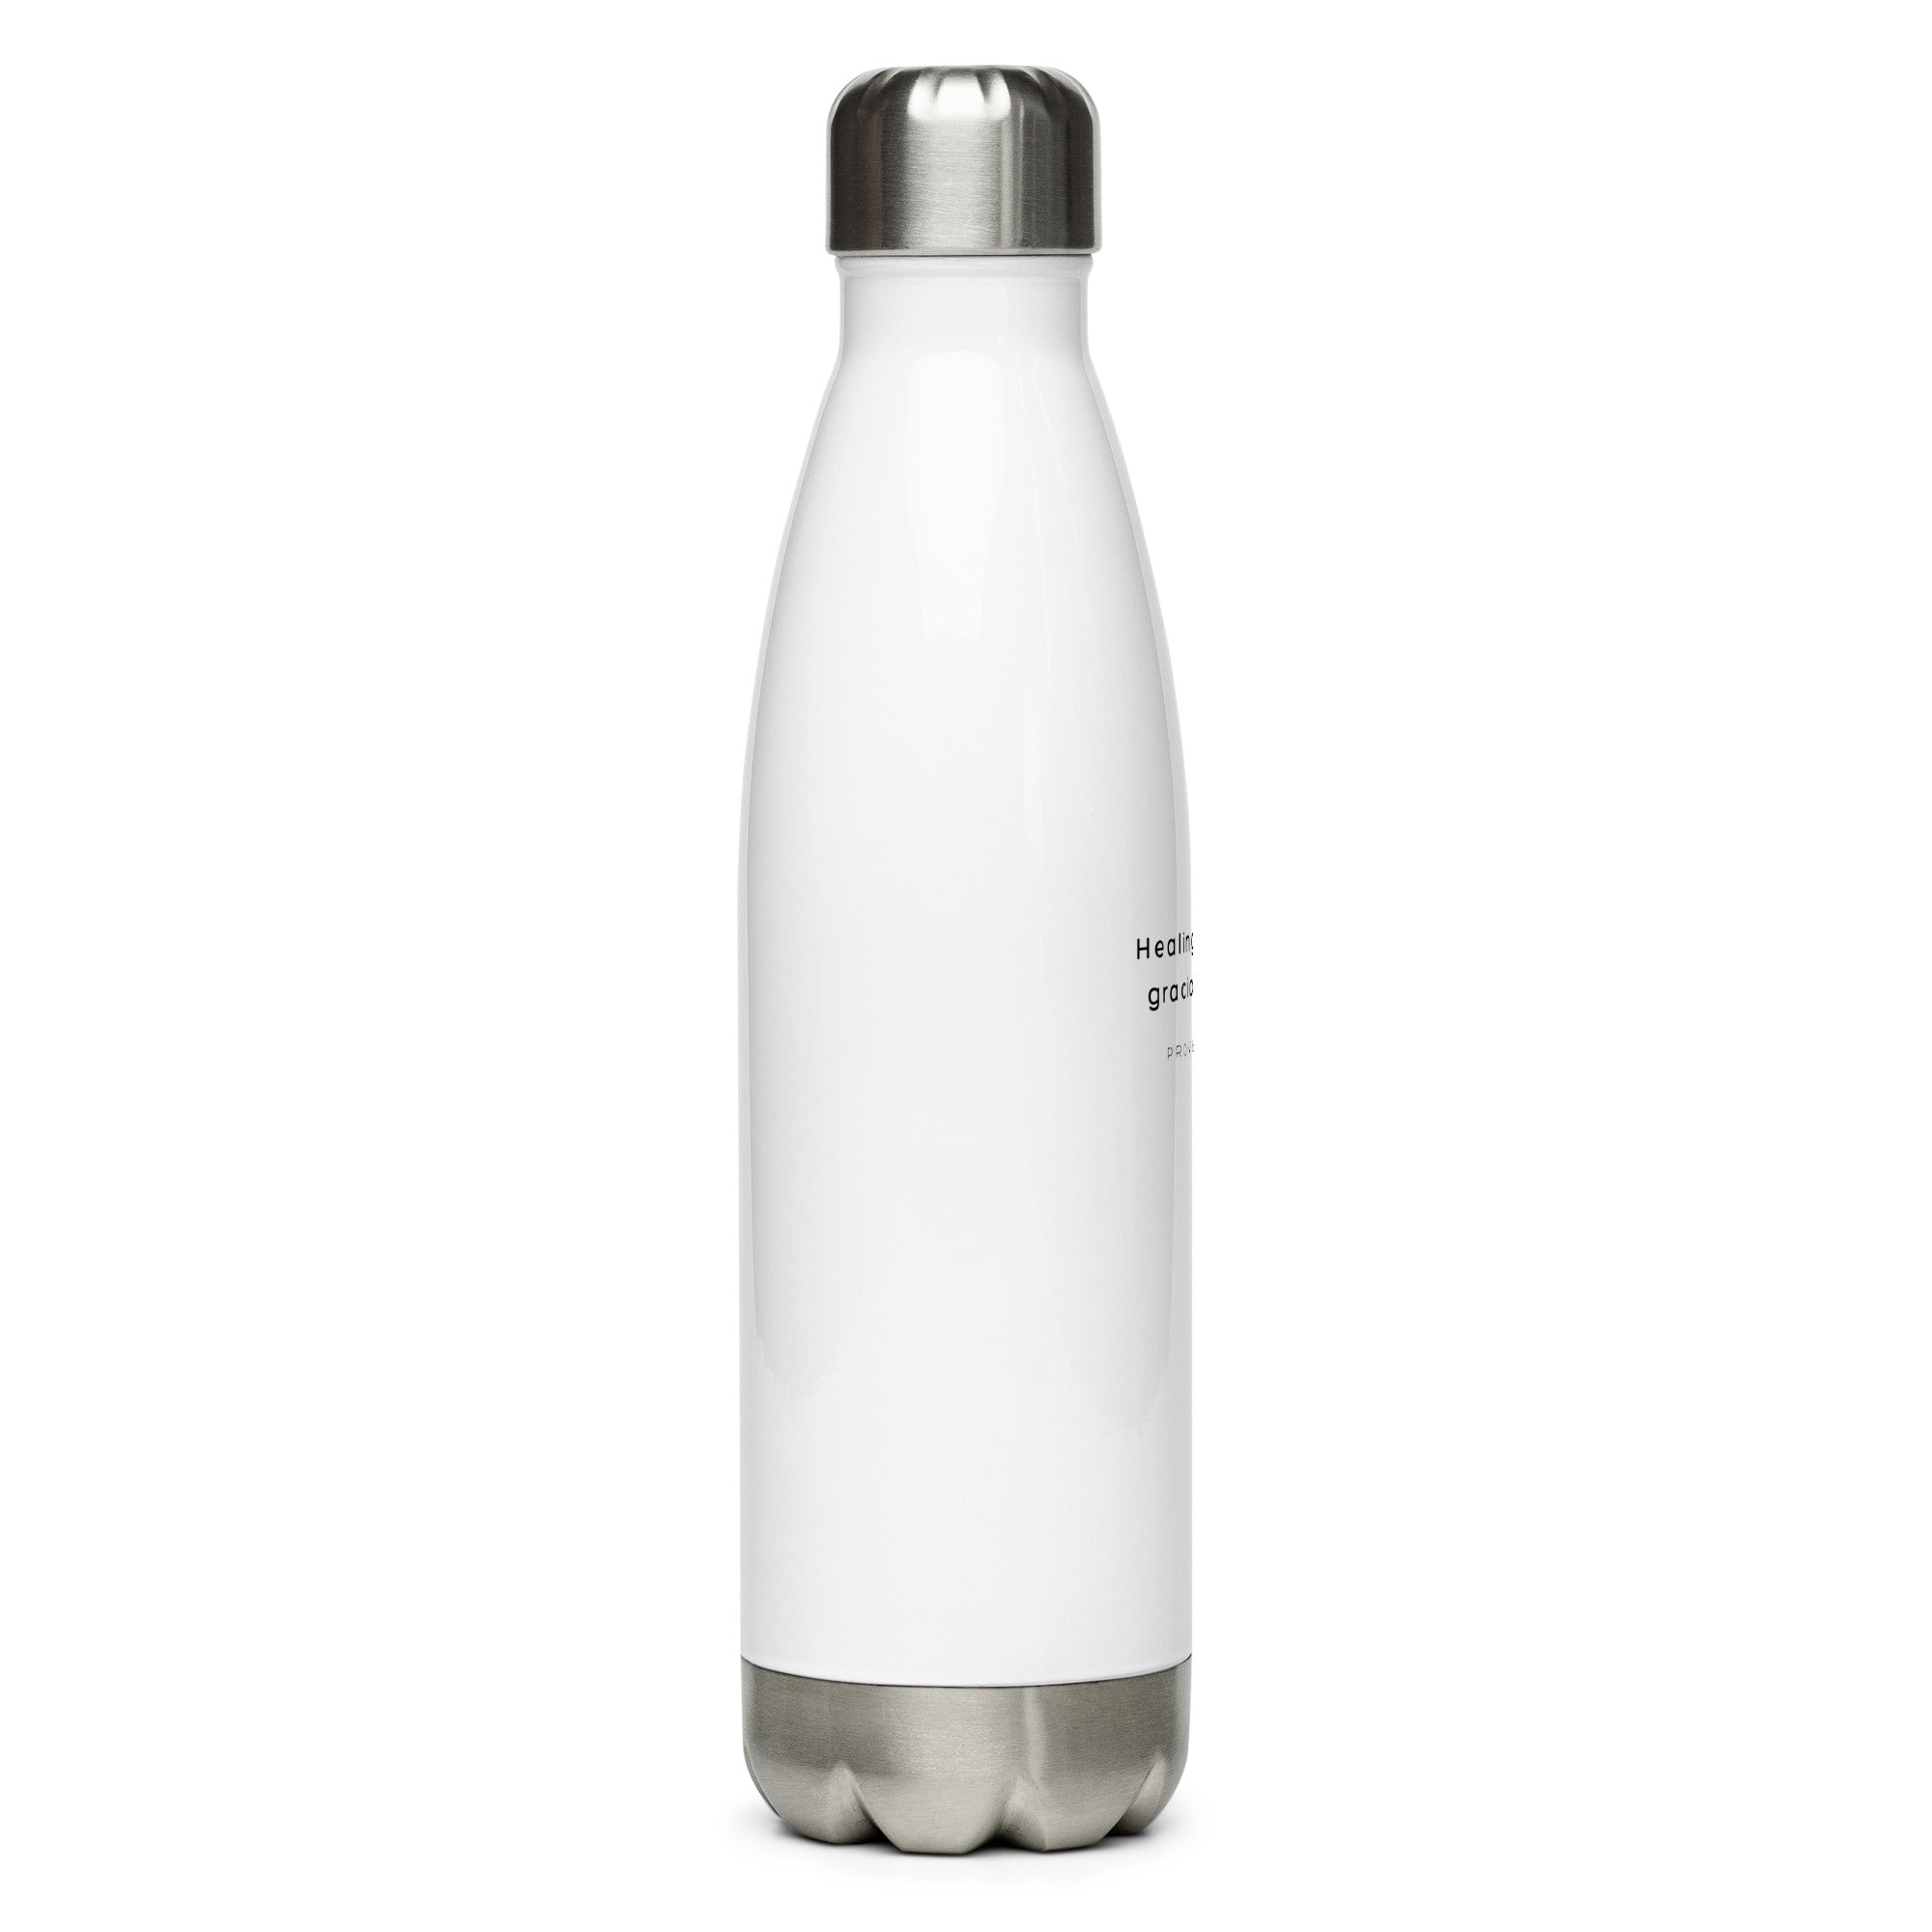 Stainless steel water bottle - Proverbs 16:24